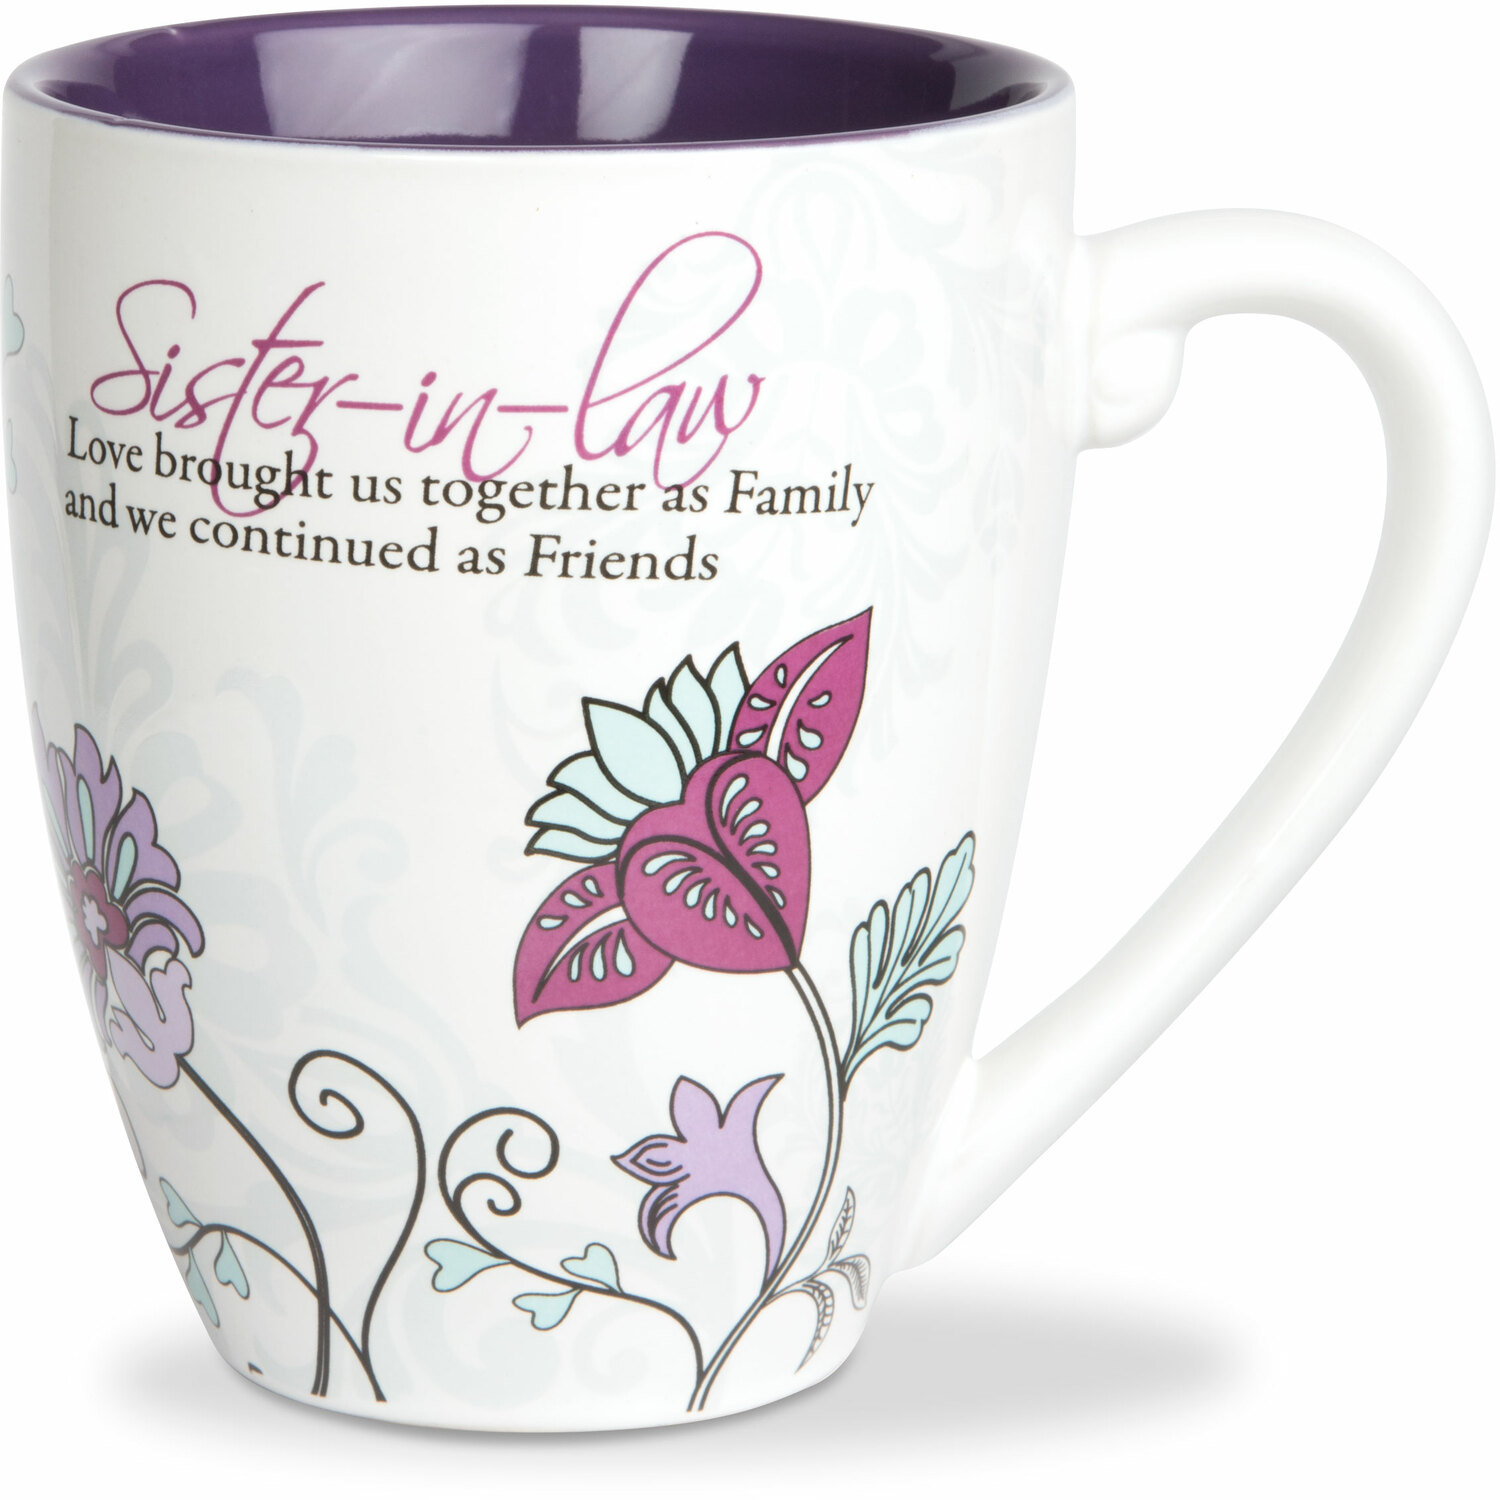 Sister-In-Law by Mark My Words - Sister-In-Law - 20 oz Cup